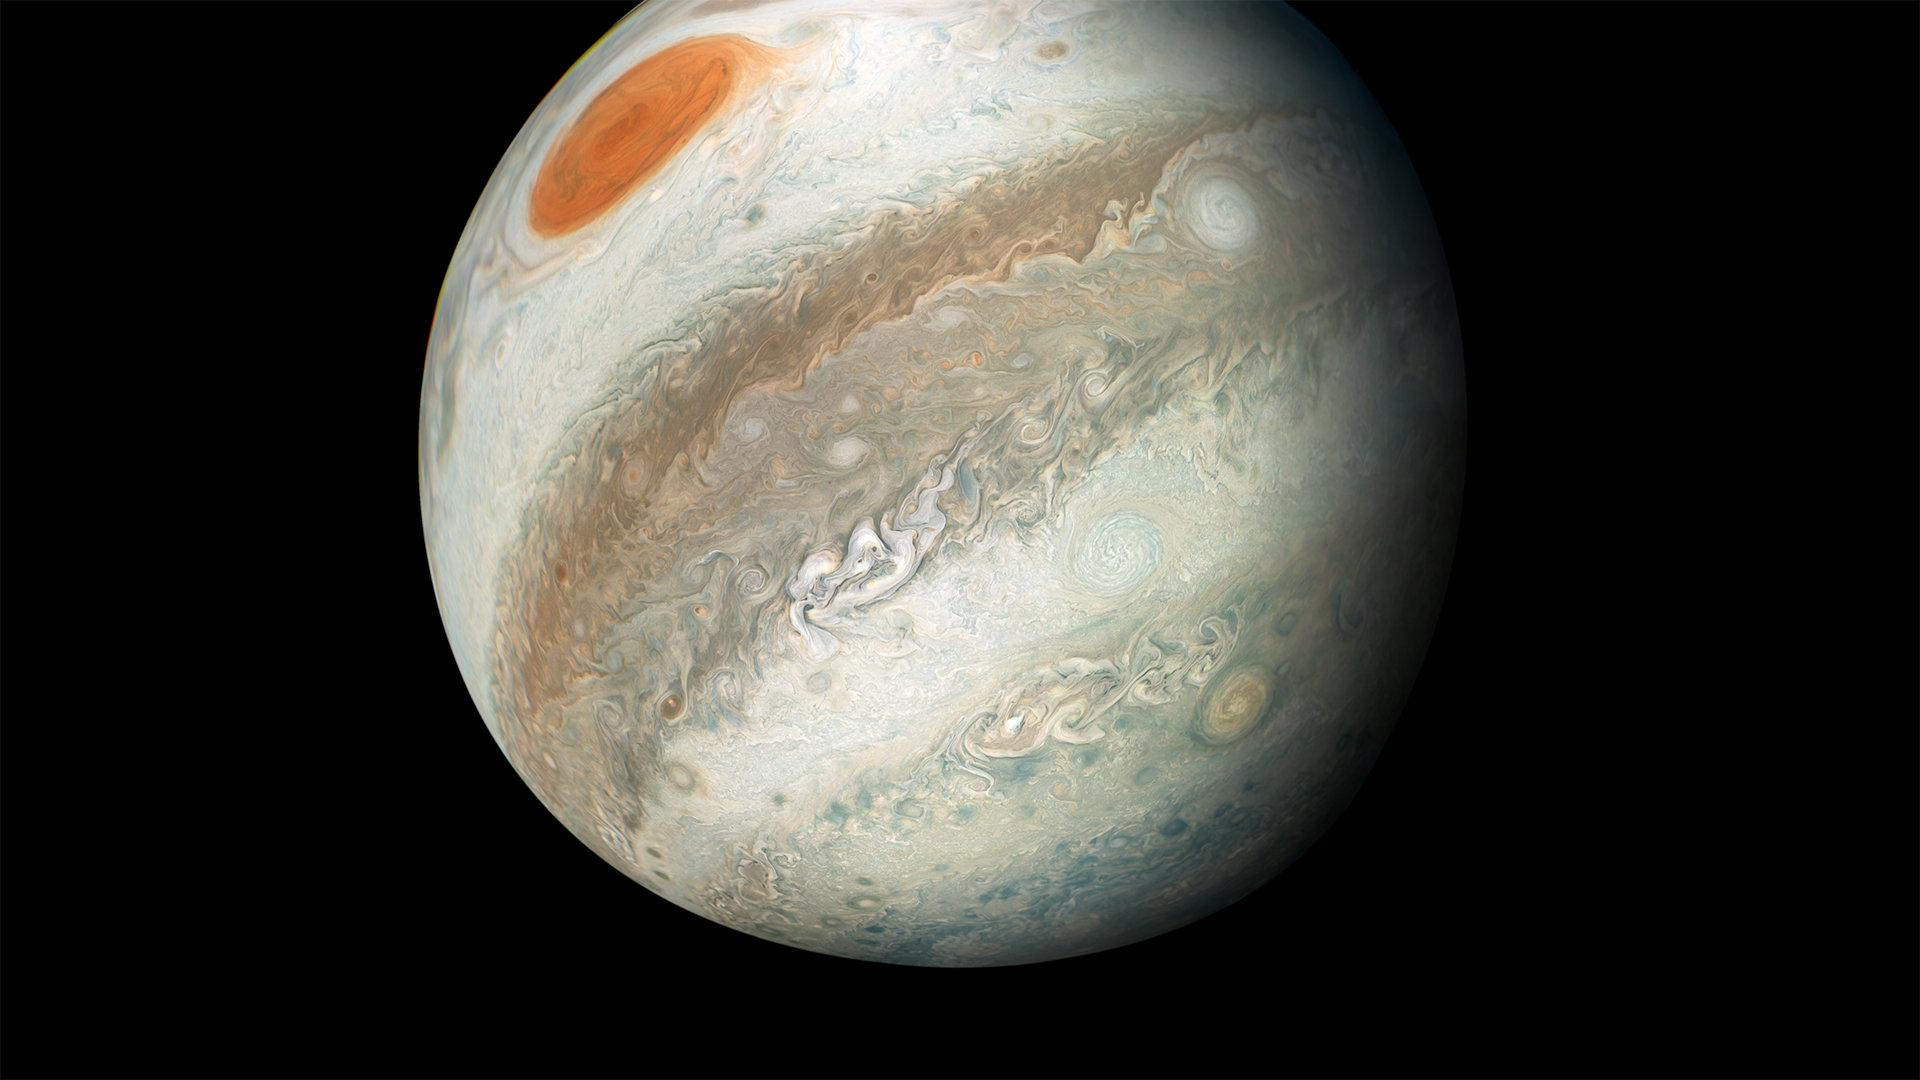 'New views of Jupiter' showcases swirling clouds on giant